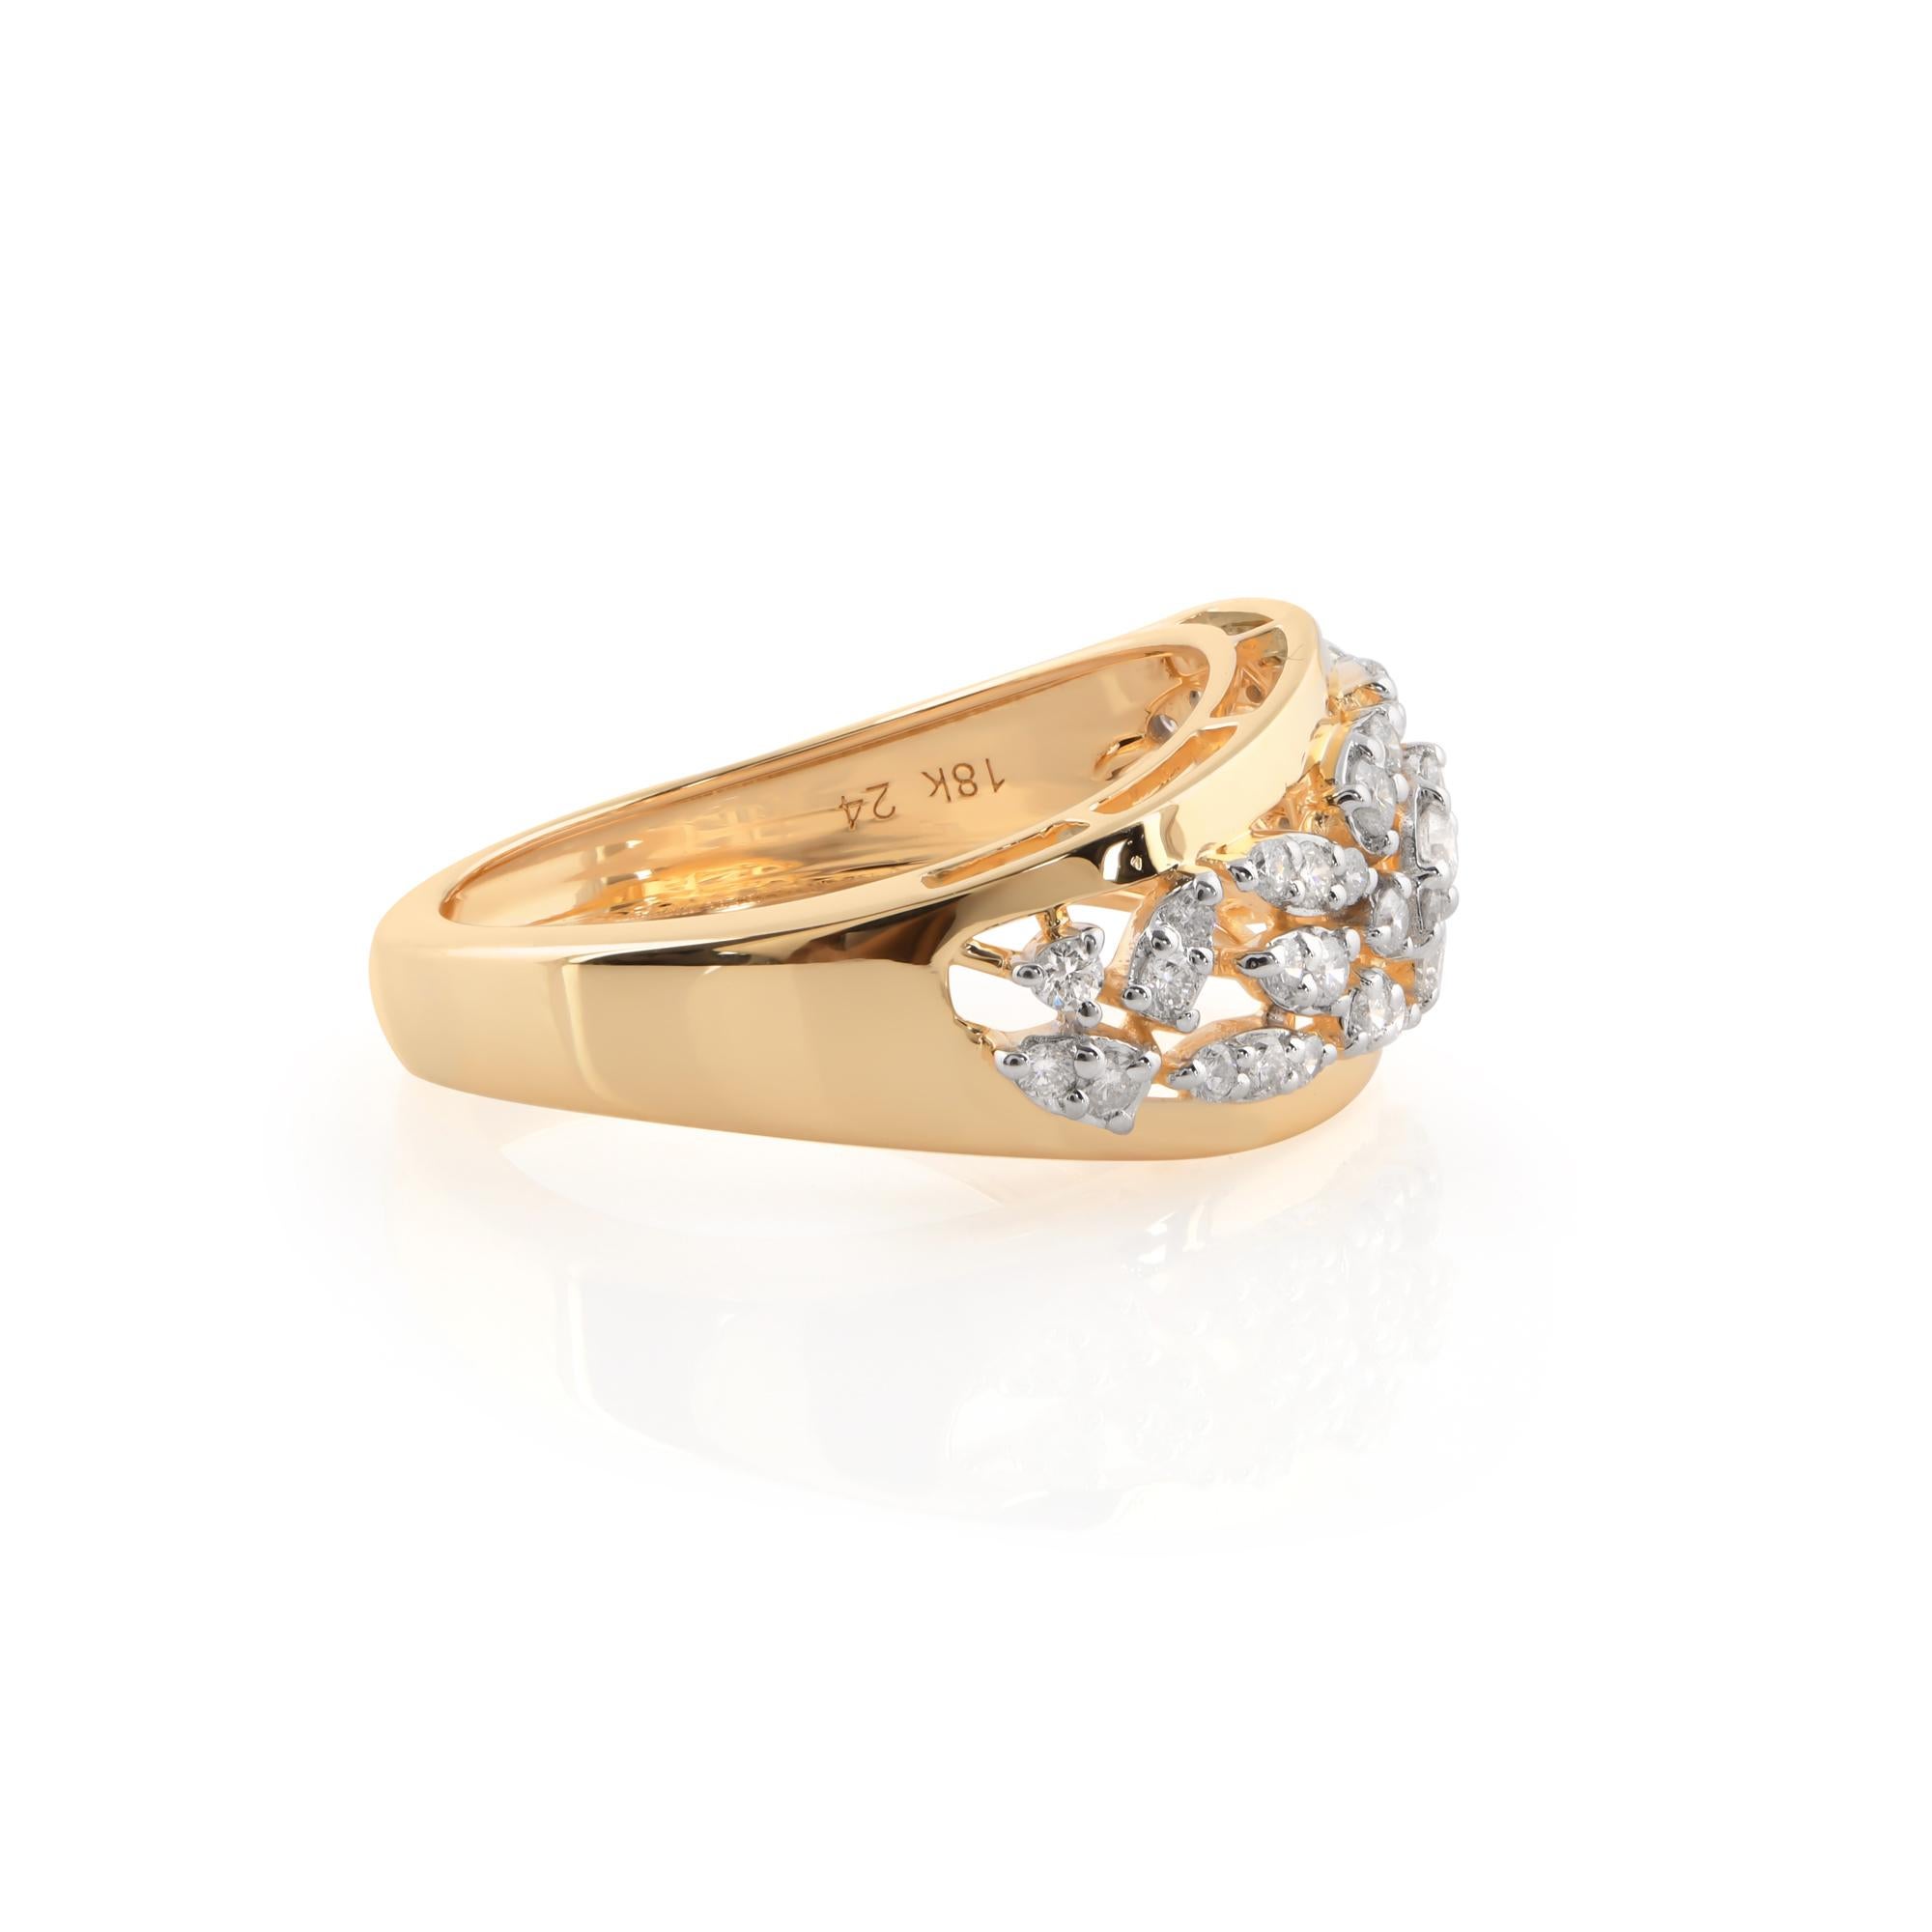 Indulge in the timeless elegance of this exquisite handmade jewelry piece featuring a stunning 0.43 carat round diamond set atop a dome-shaped 18 karat yellow gold ring. Each element of this masterpiece is meticulously crafted to perfection,